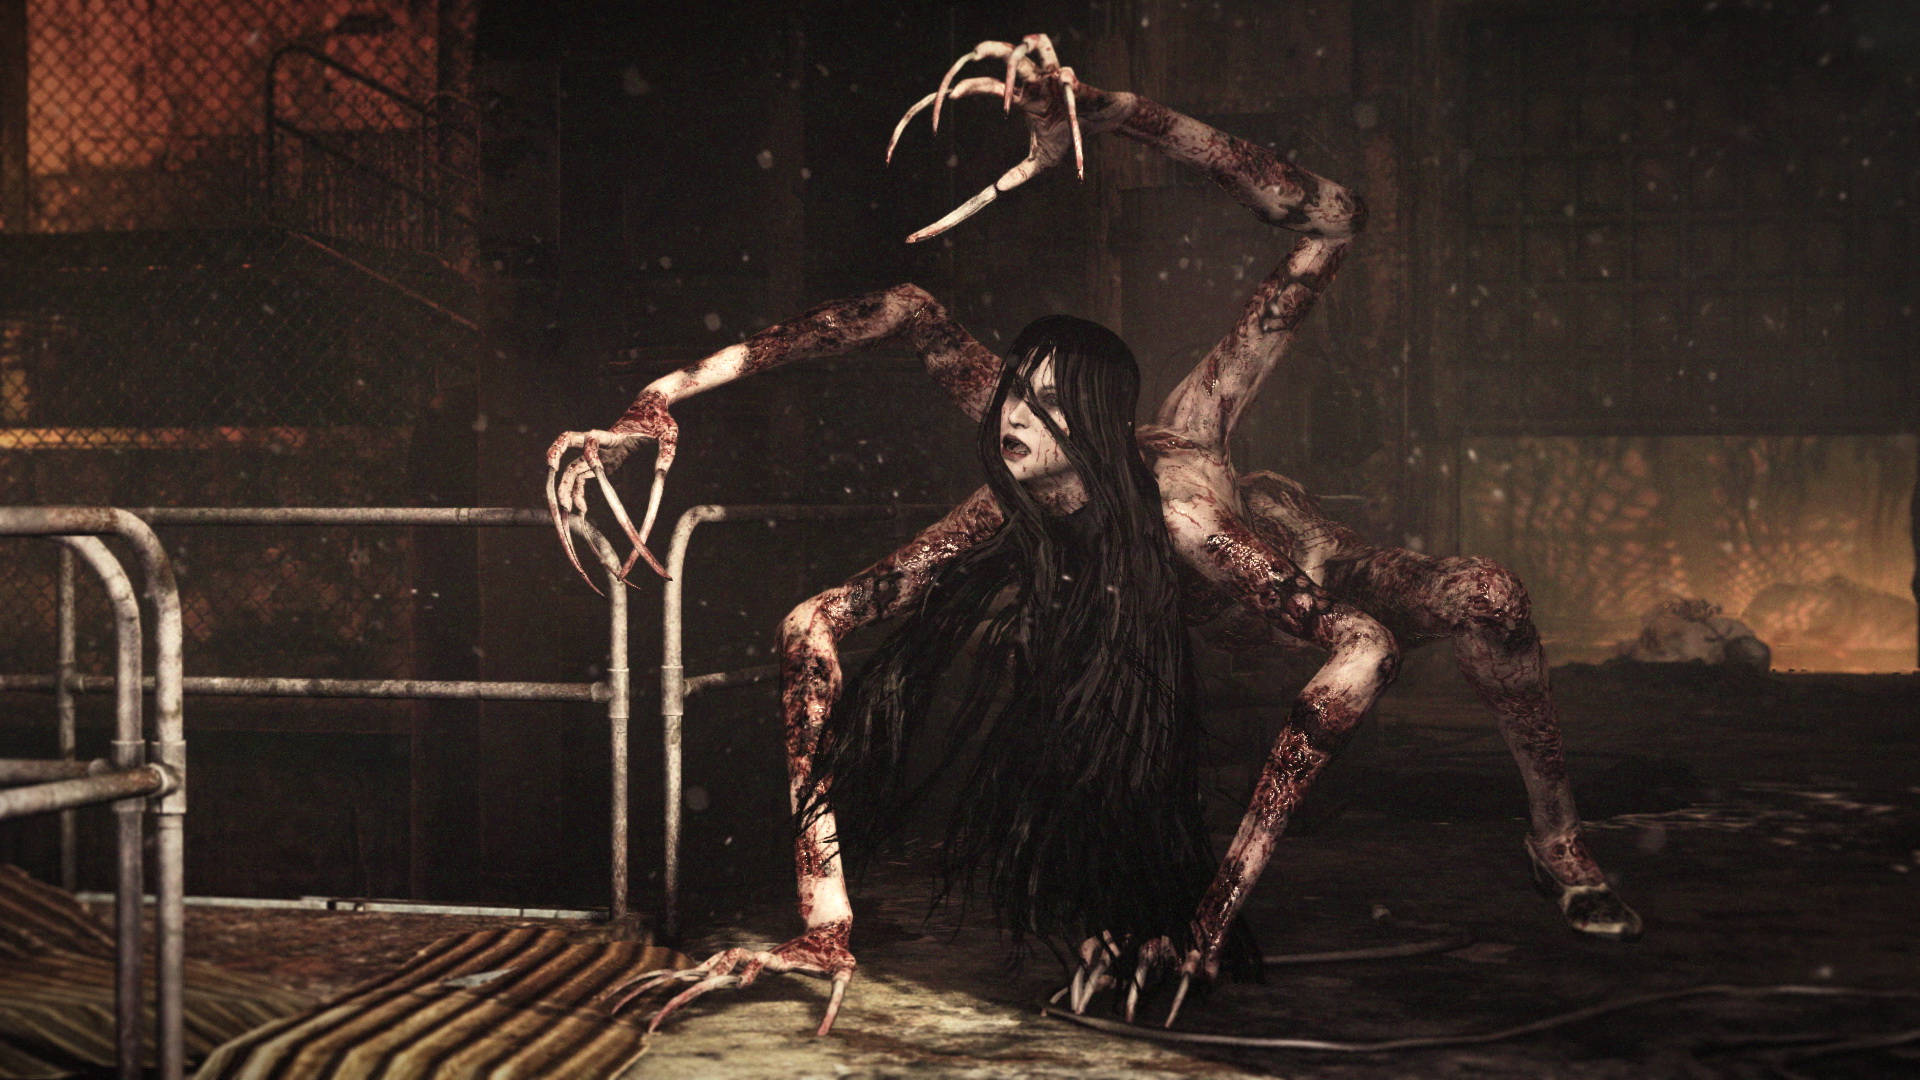 Screenshot of The Evil Within (2014) PC game |  RG Mechanical RePack